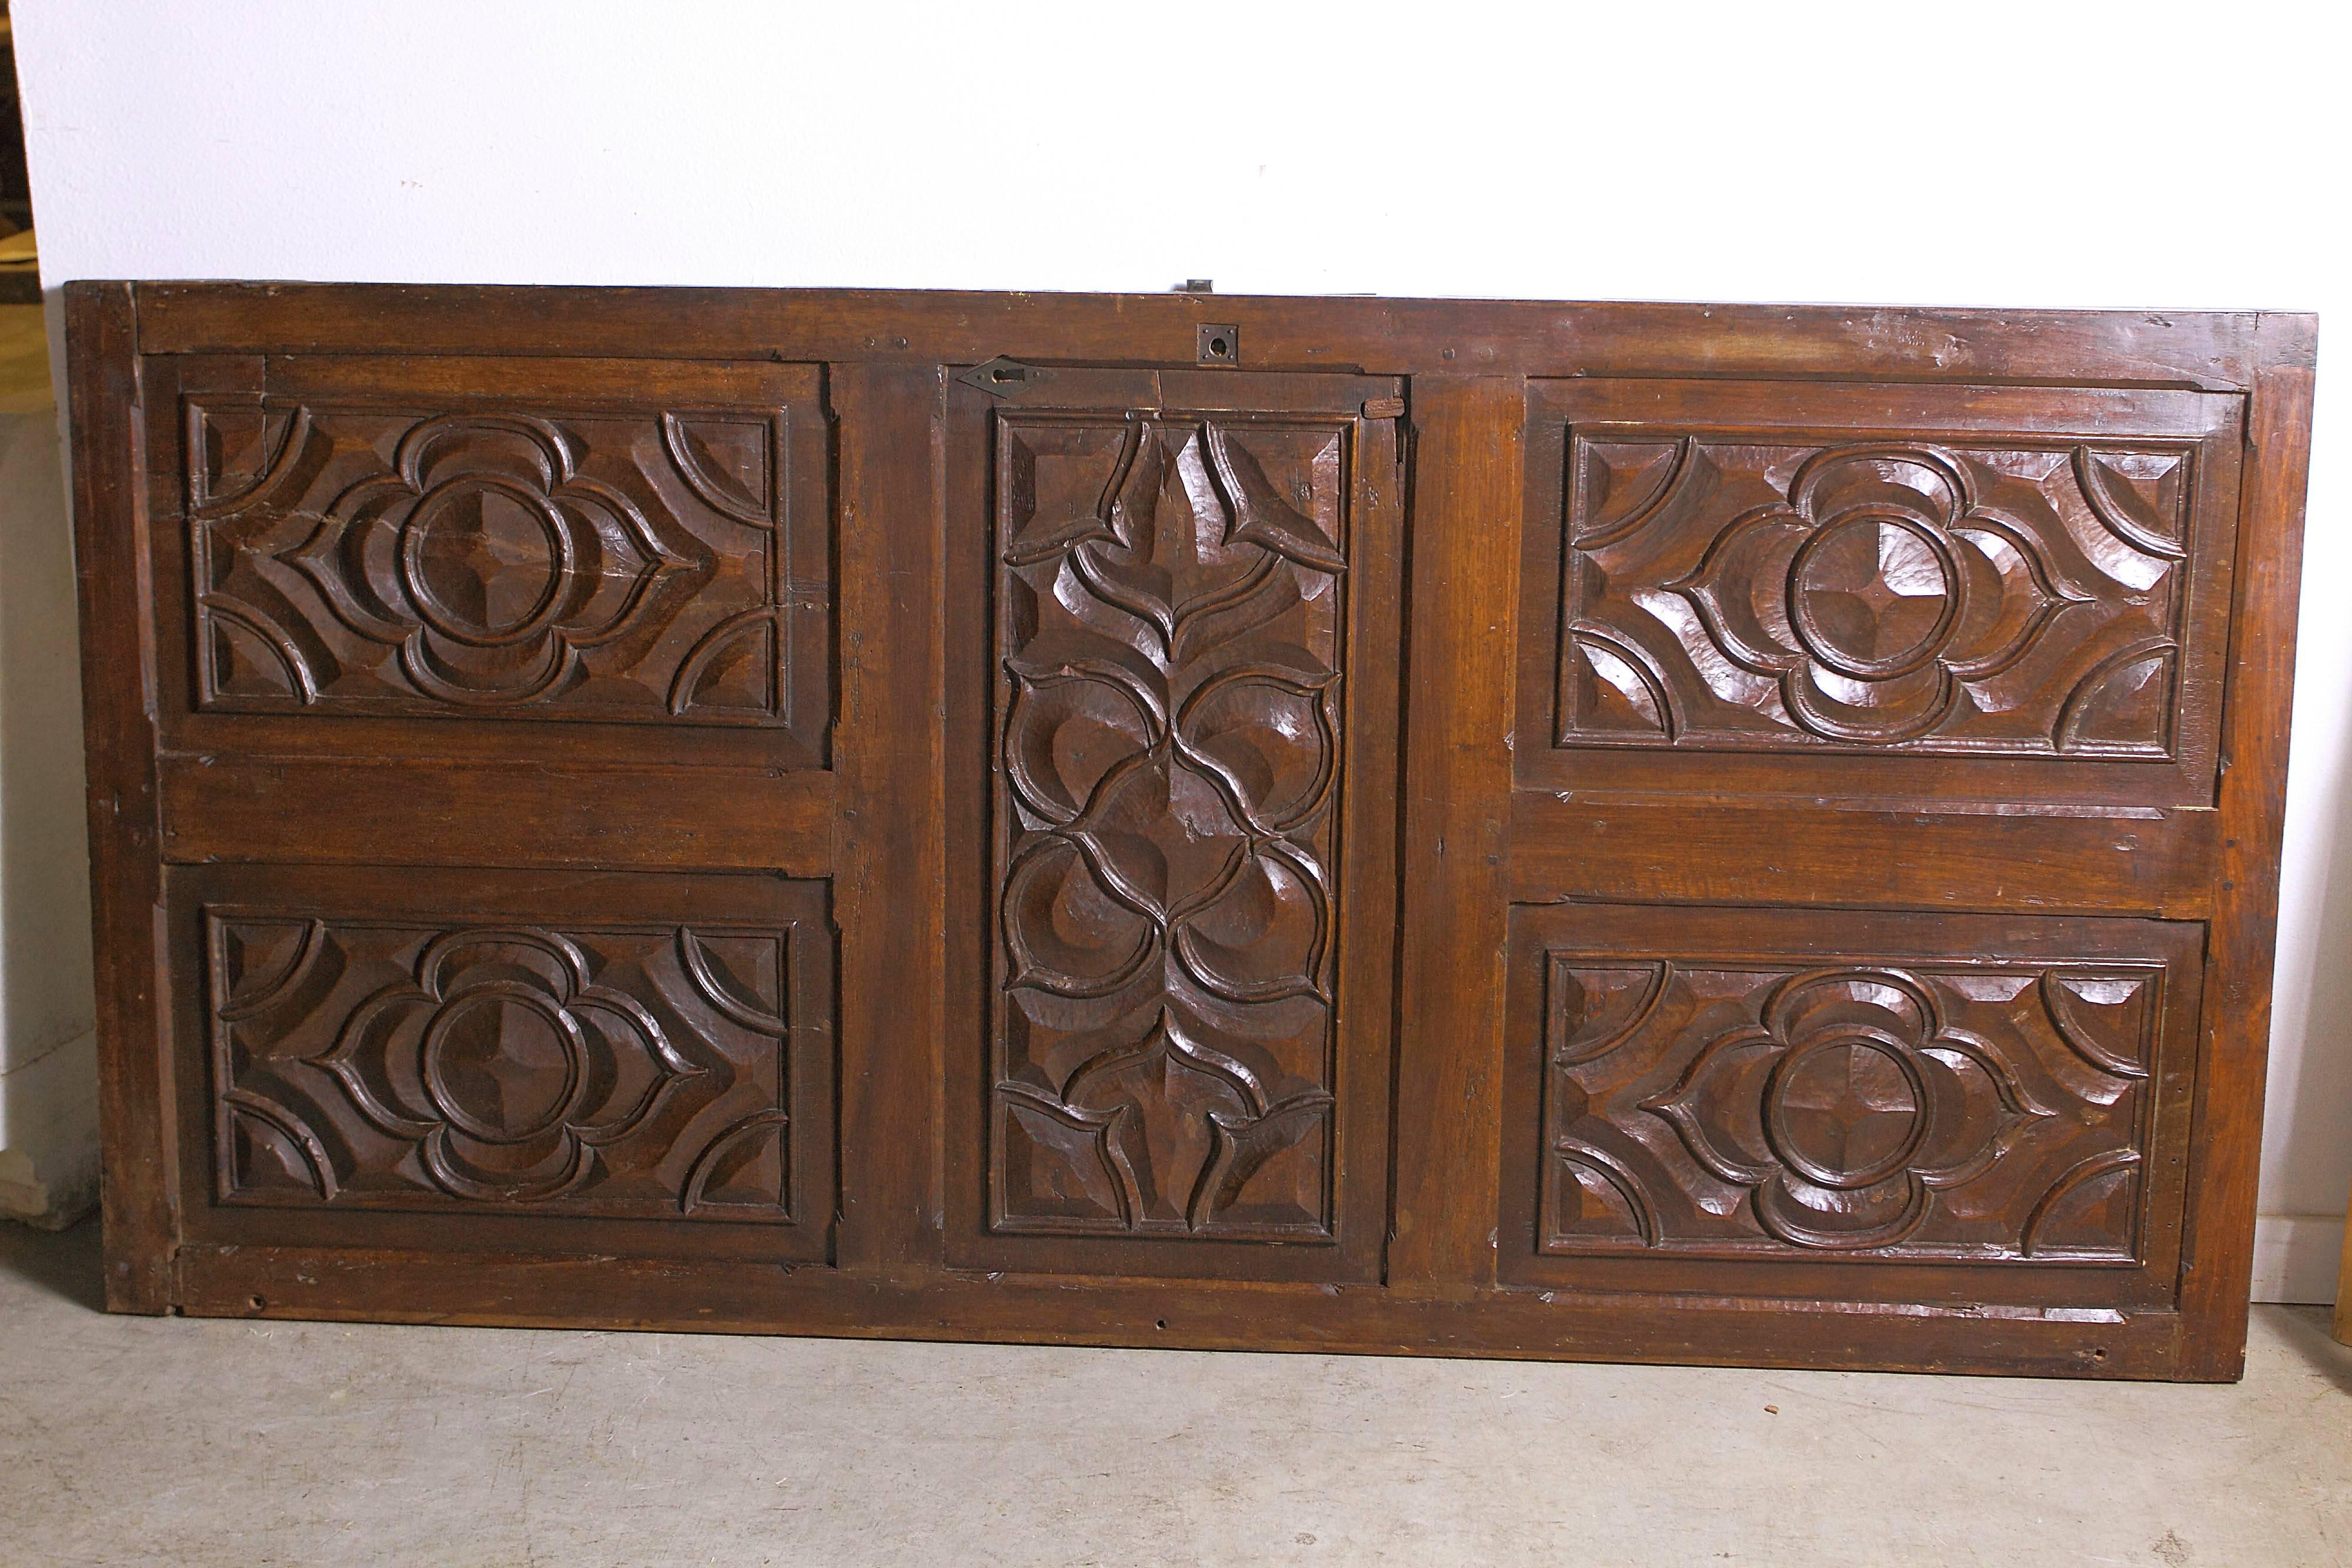 This bold walnut wood door from the 1600’s is from the area of Languedoc, in southern France. The hand carved, raised, beveled motifs are Gothic quatrefoil and cinquefoil cusps. The carving is deep and shows flawless hand carved shapes. There are